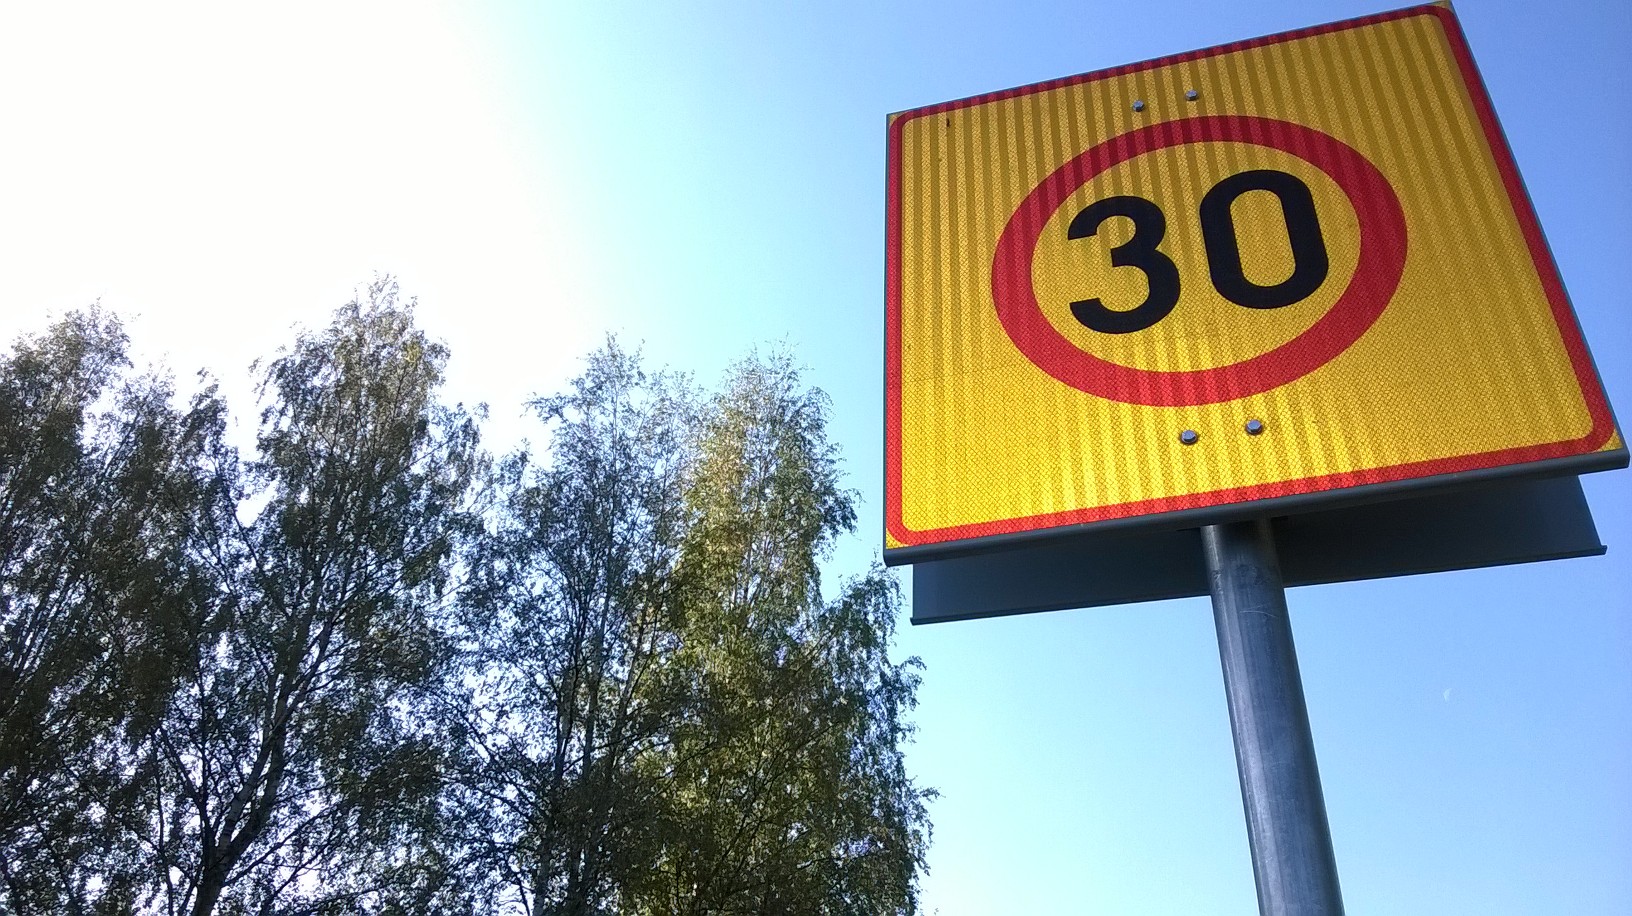 The Finnish Safety Agency calls for an increase in speed limits of 30 km / h on Finnish roads